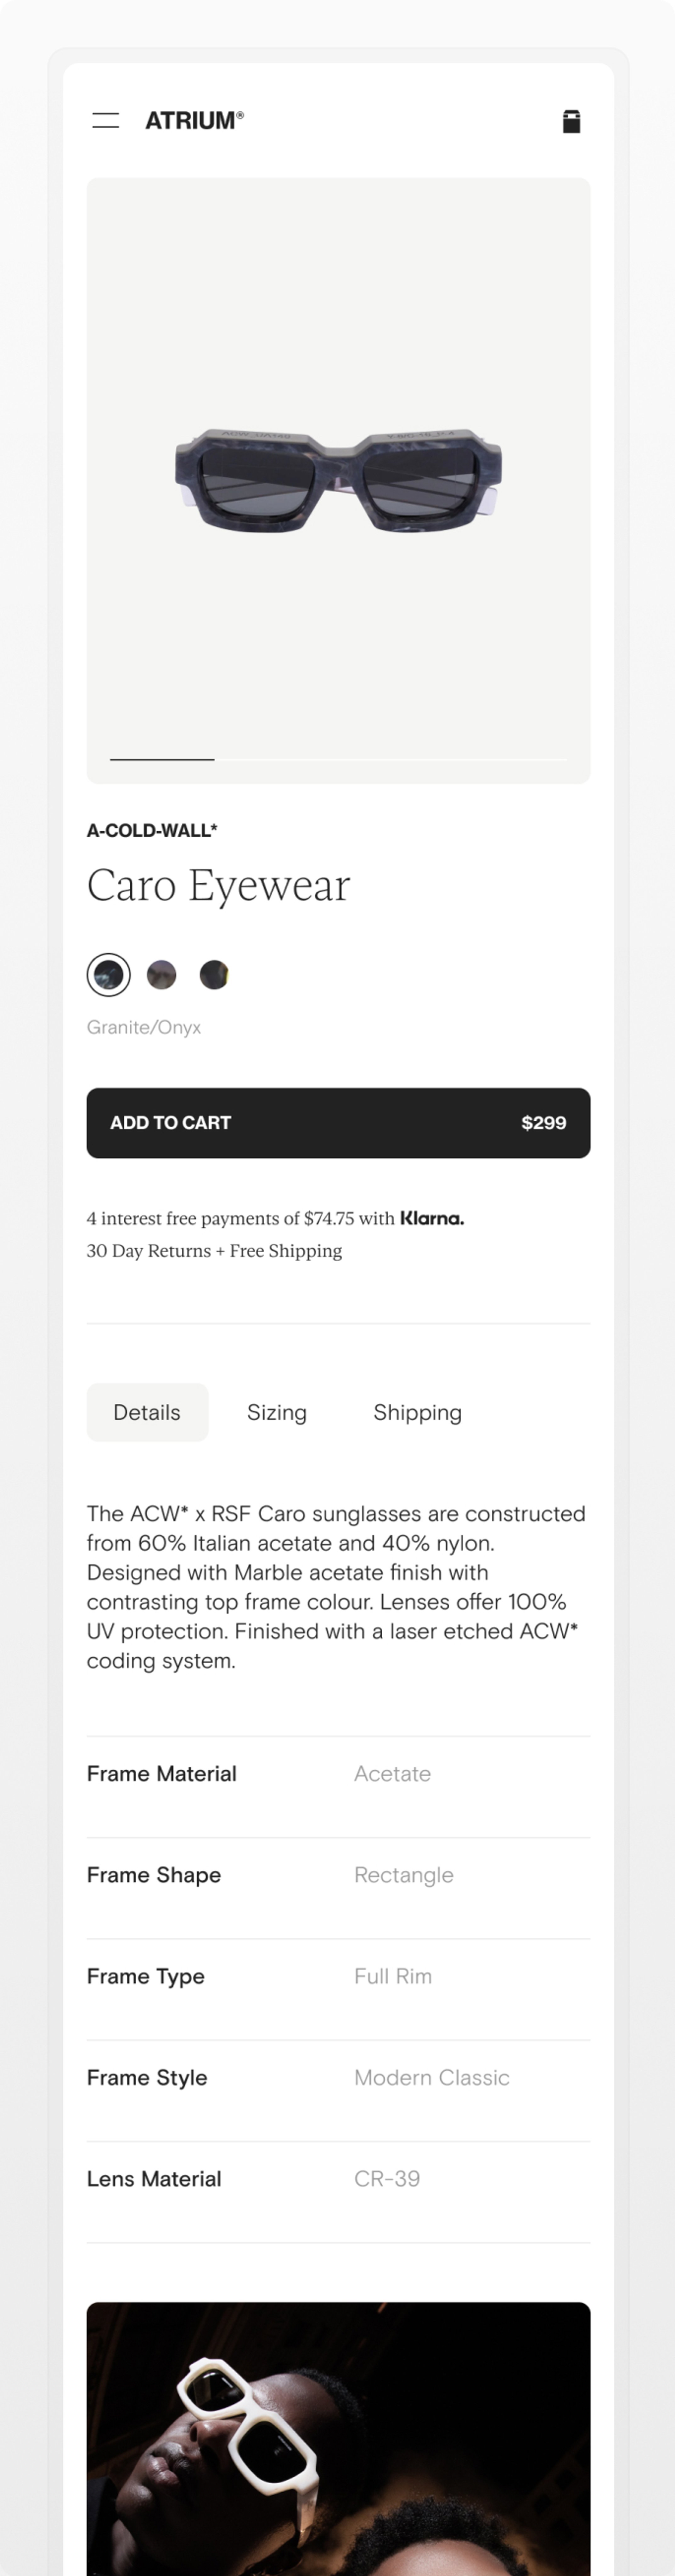 Image of the product description page on Atrium showing a pair of A-COLD-WALL* sunglasses